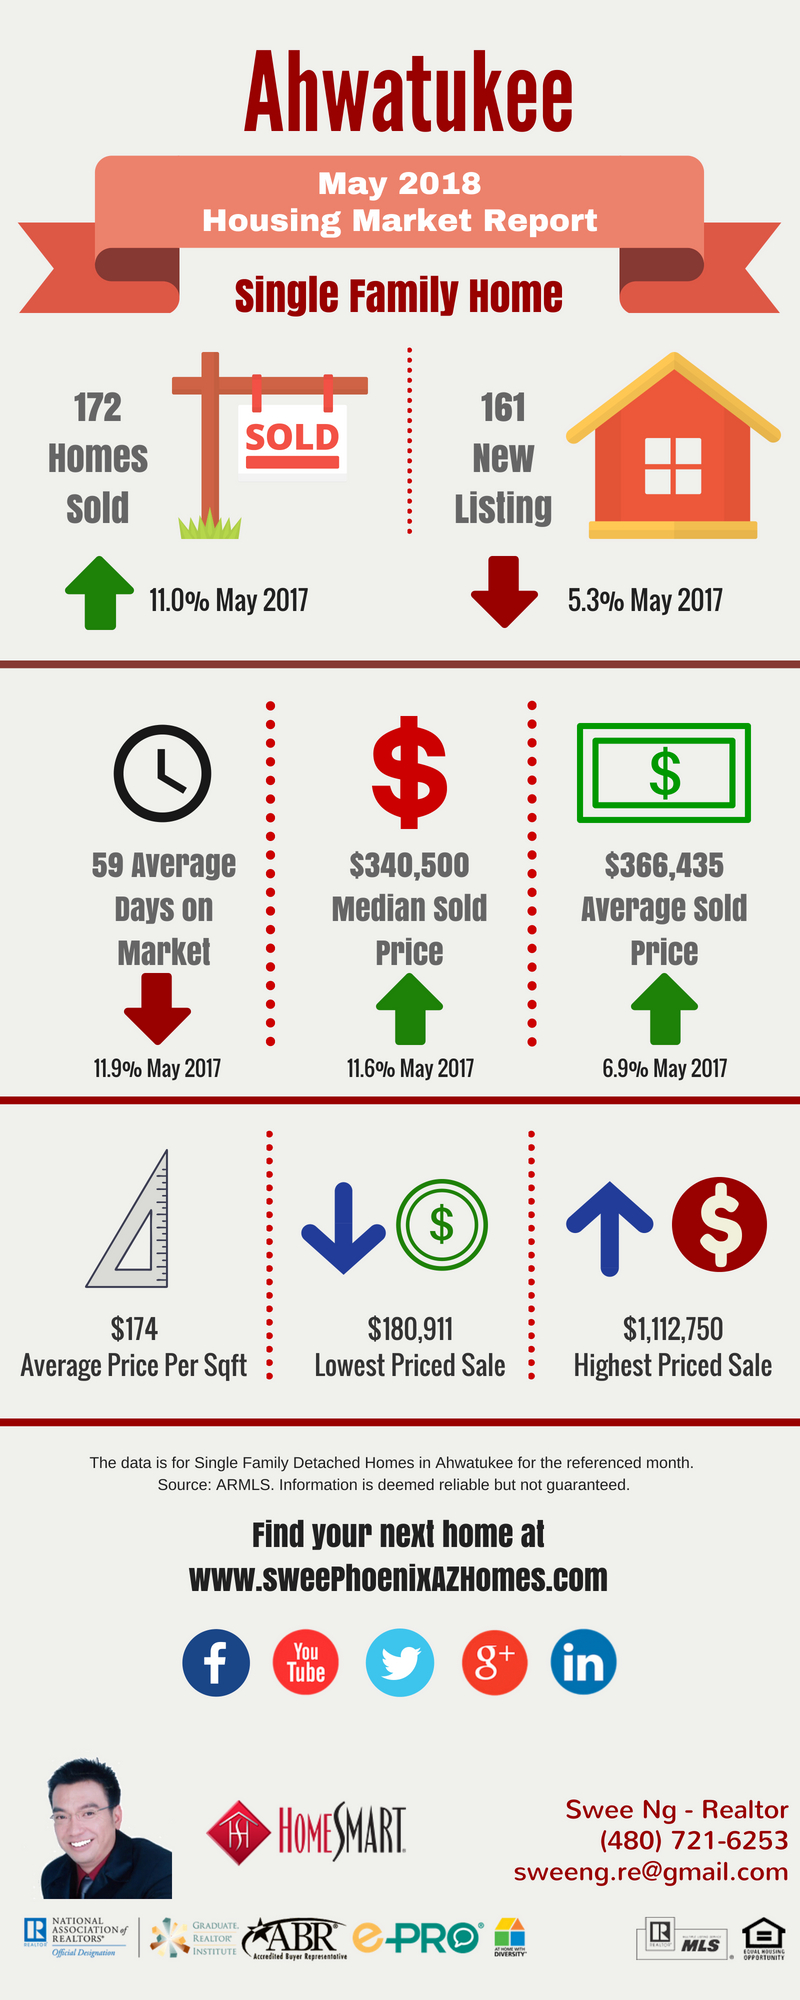 Ahwatukee Housing Market Trends Report May 2018, House Value, Real Estate and Statistic by Swee Ng